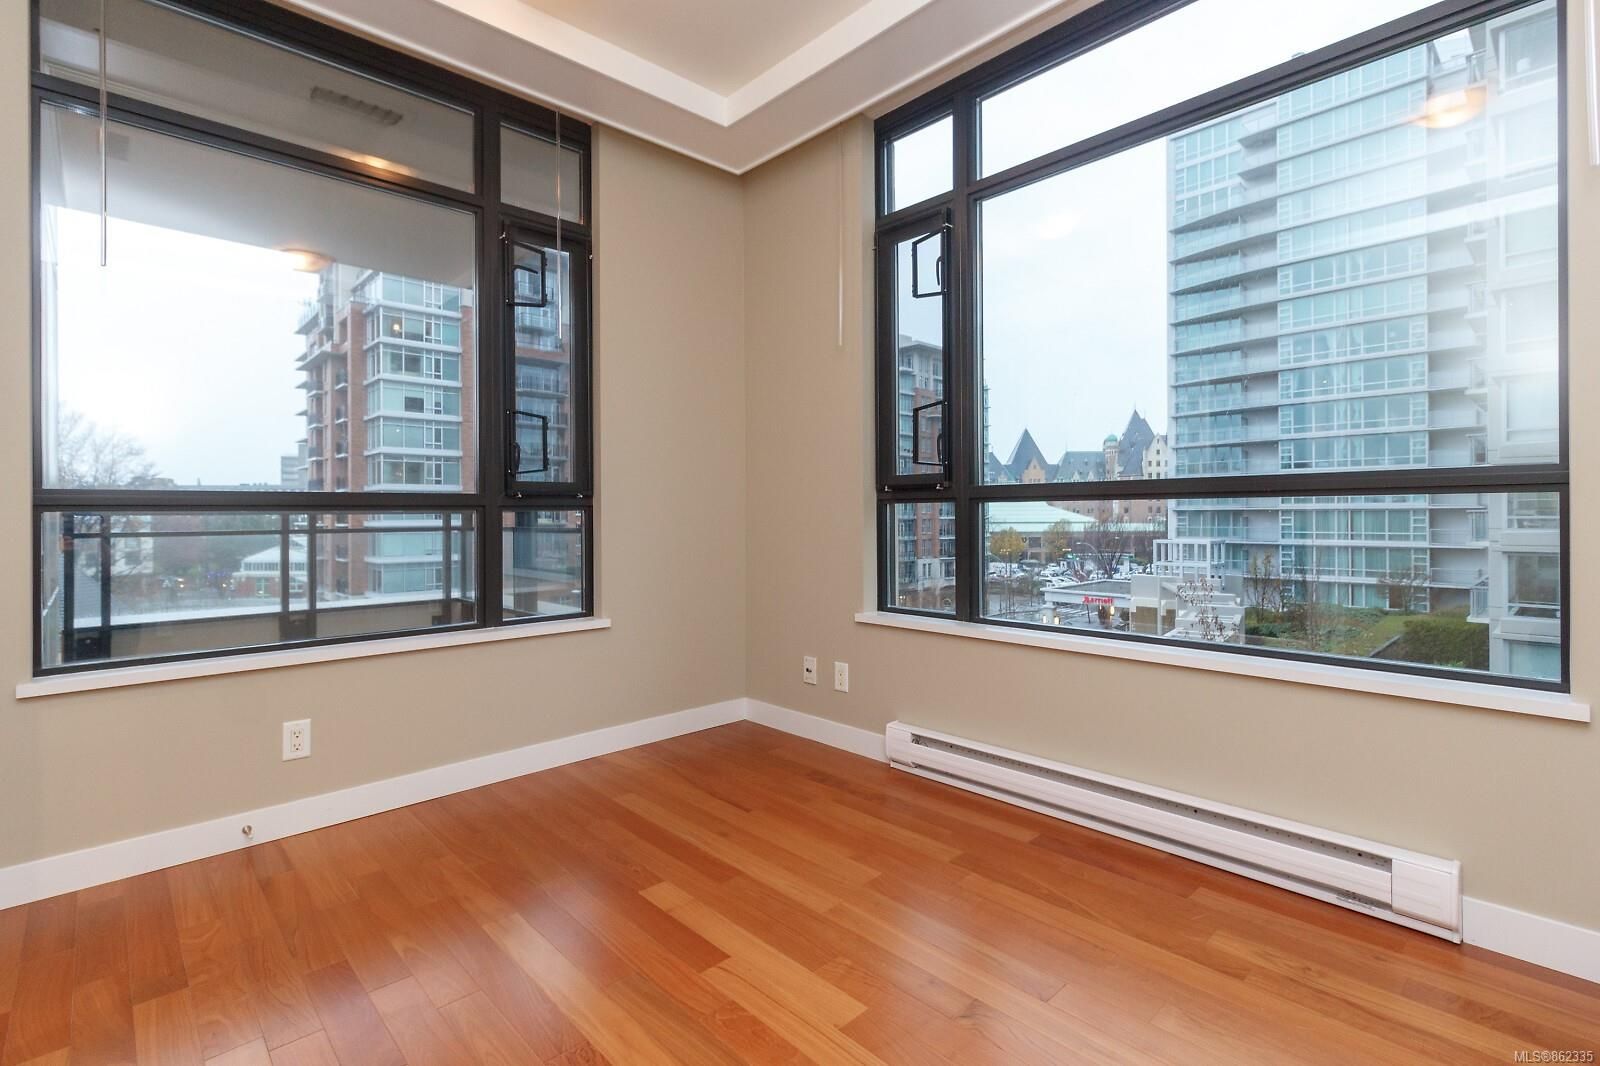 Photo 16: Photos: 406 788 Humboldt St in Victoria: Vi Downtown Condo for sale : MLS®# 862335